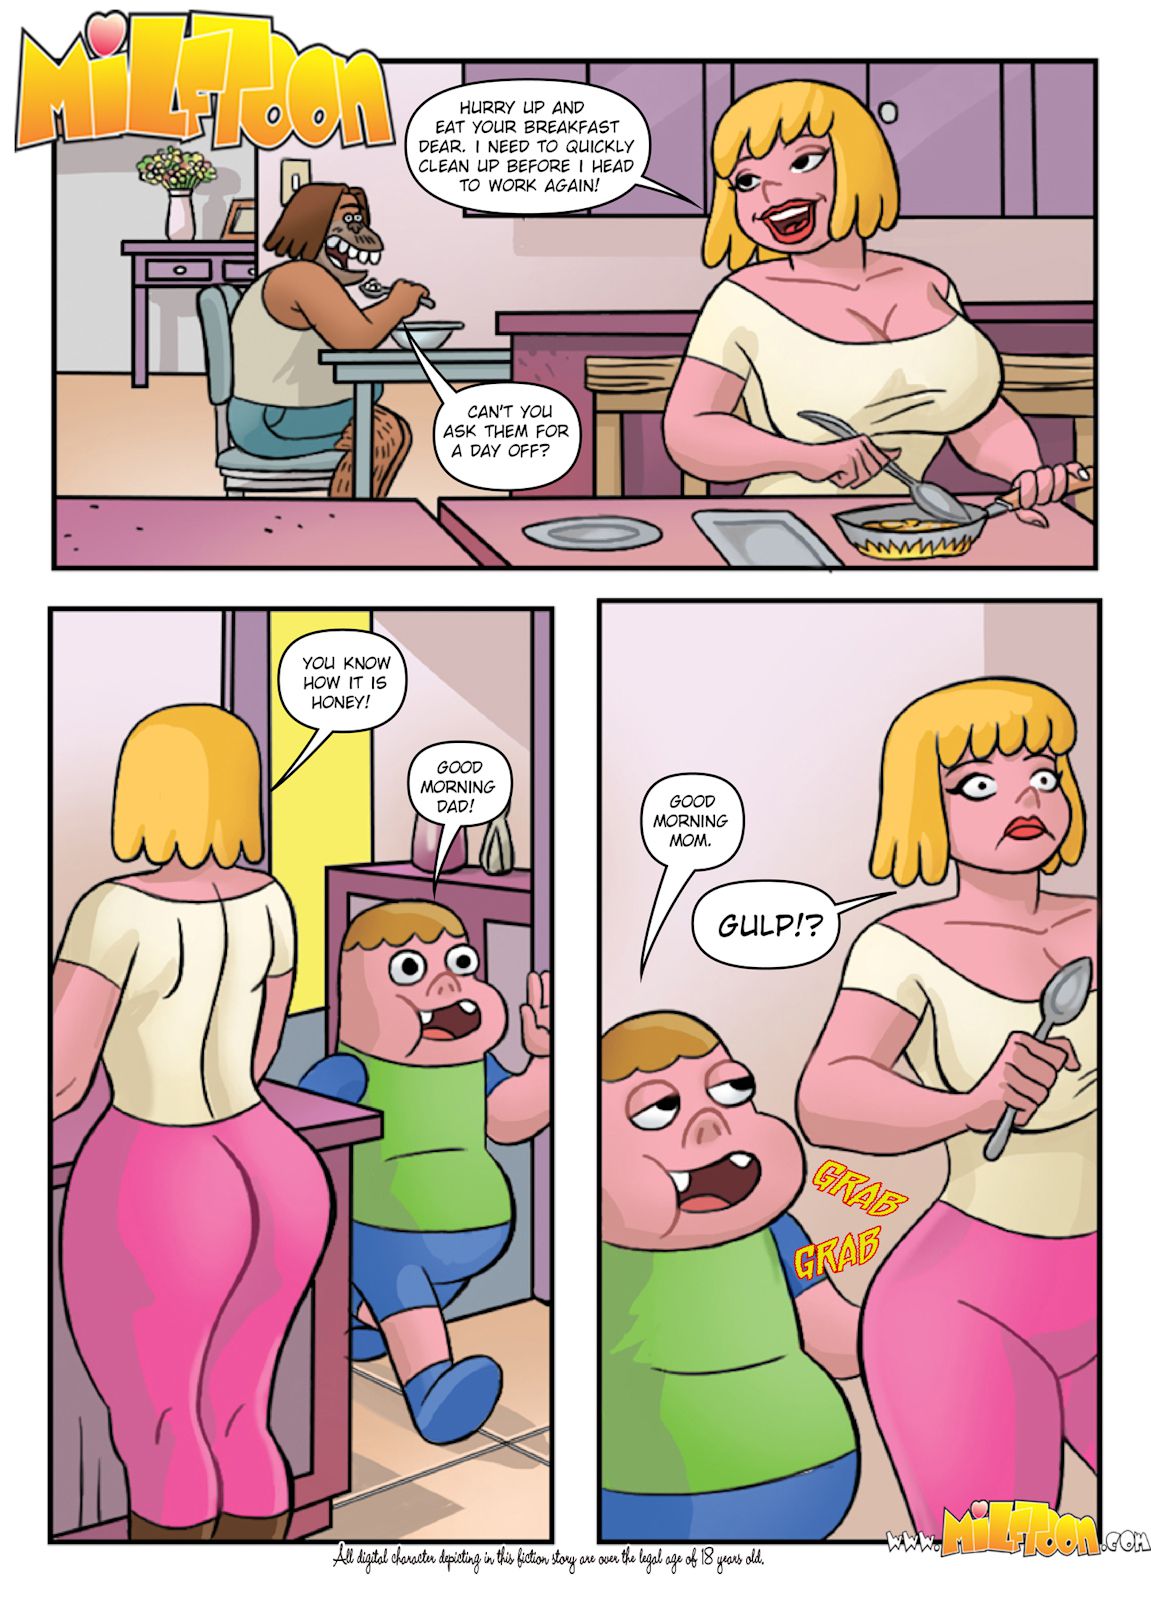 Clarence Goes Naughty: The Best Porn Comics You'll Ever See!